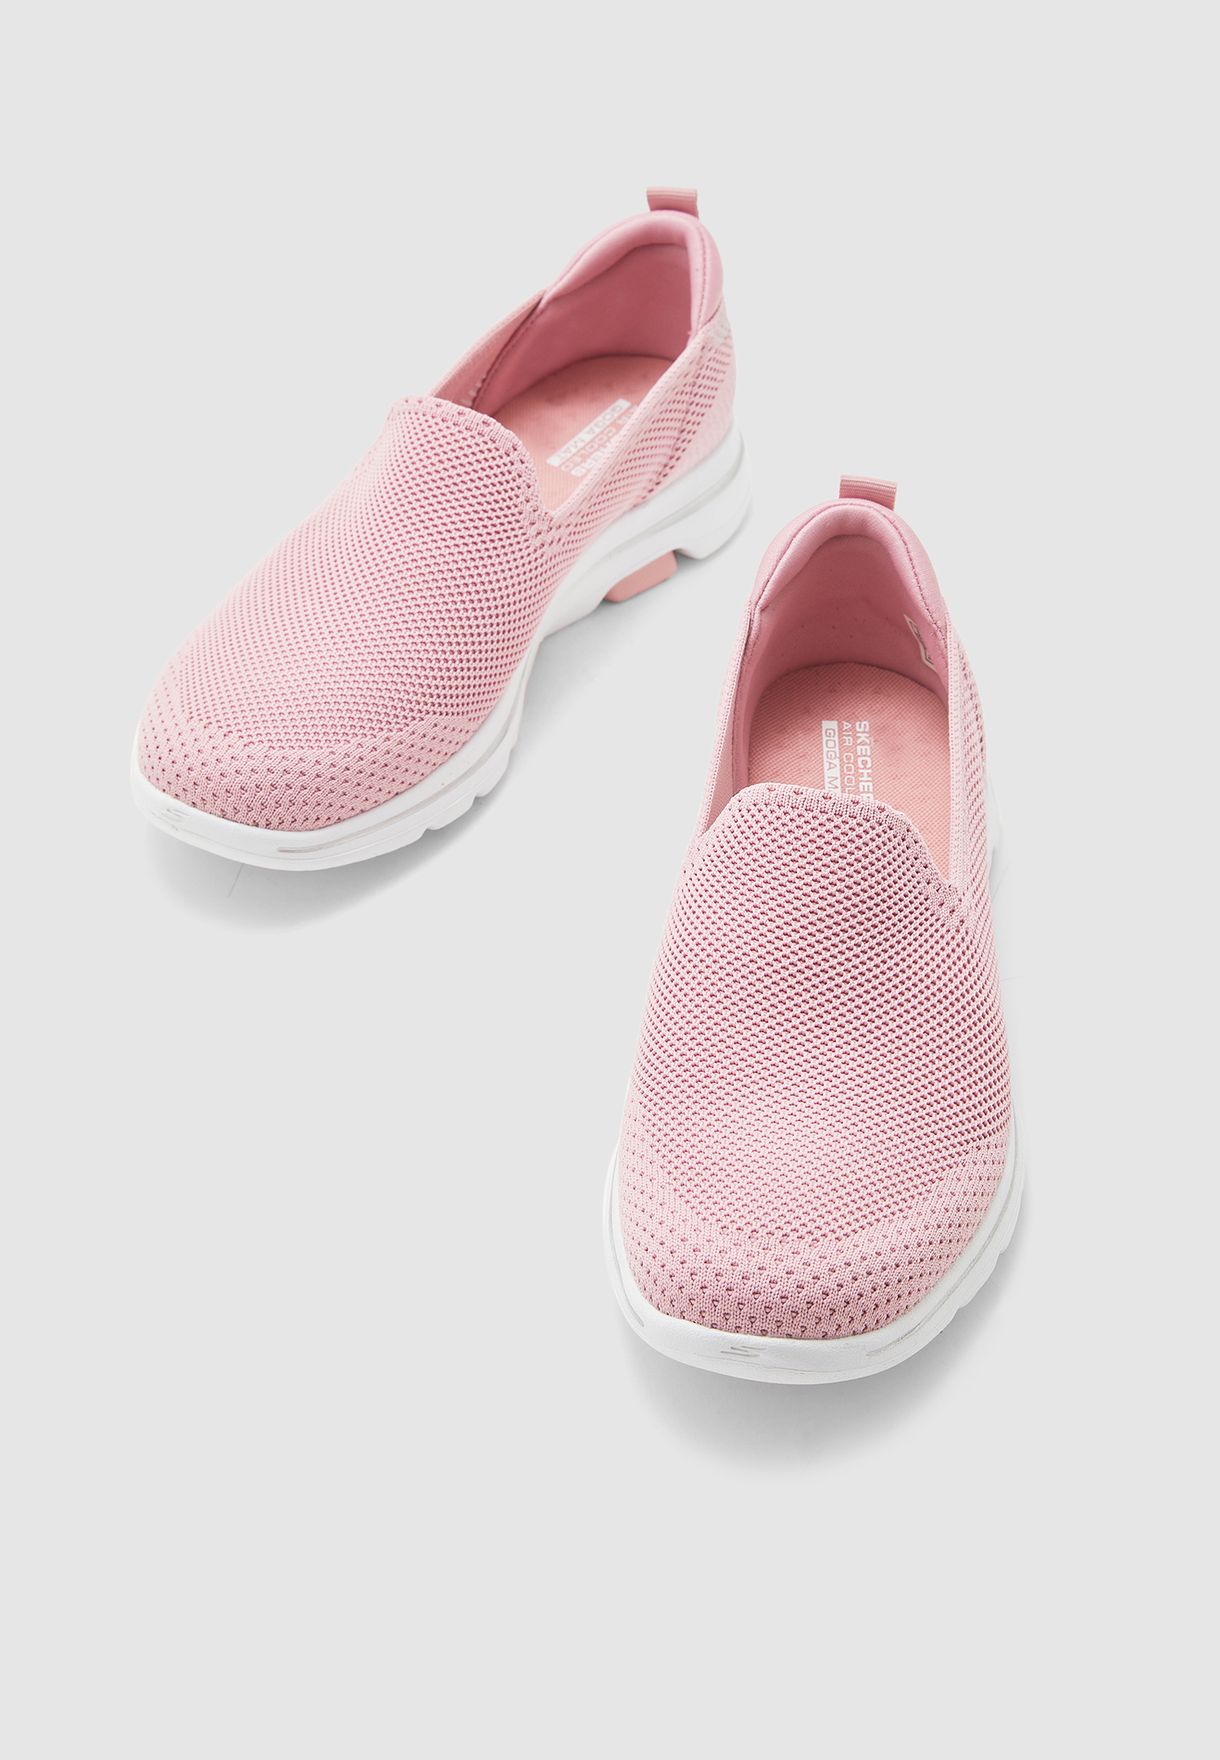 skechers go walk 5 pink OFF 57% - Online Shopping Site for Fashion \u0026  Lifestyle.